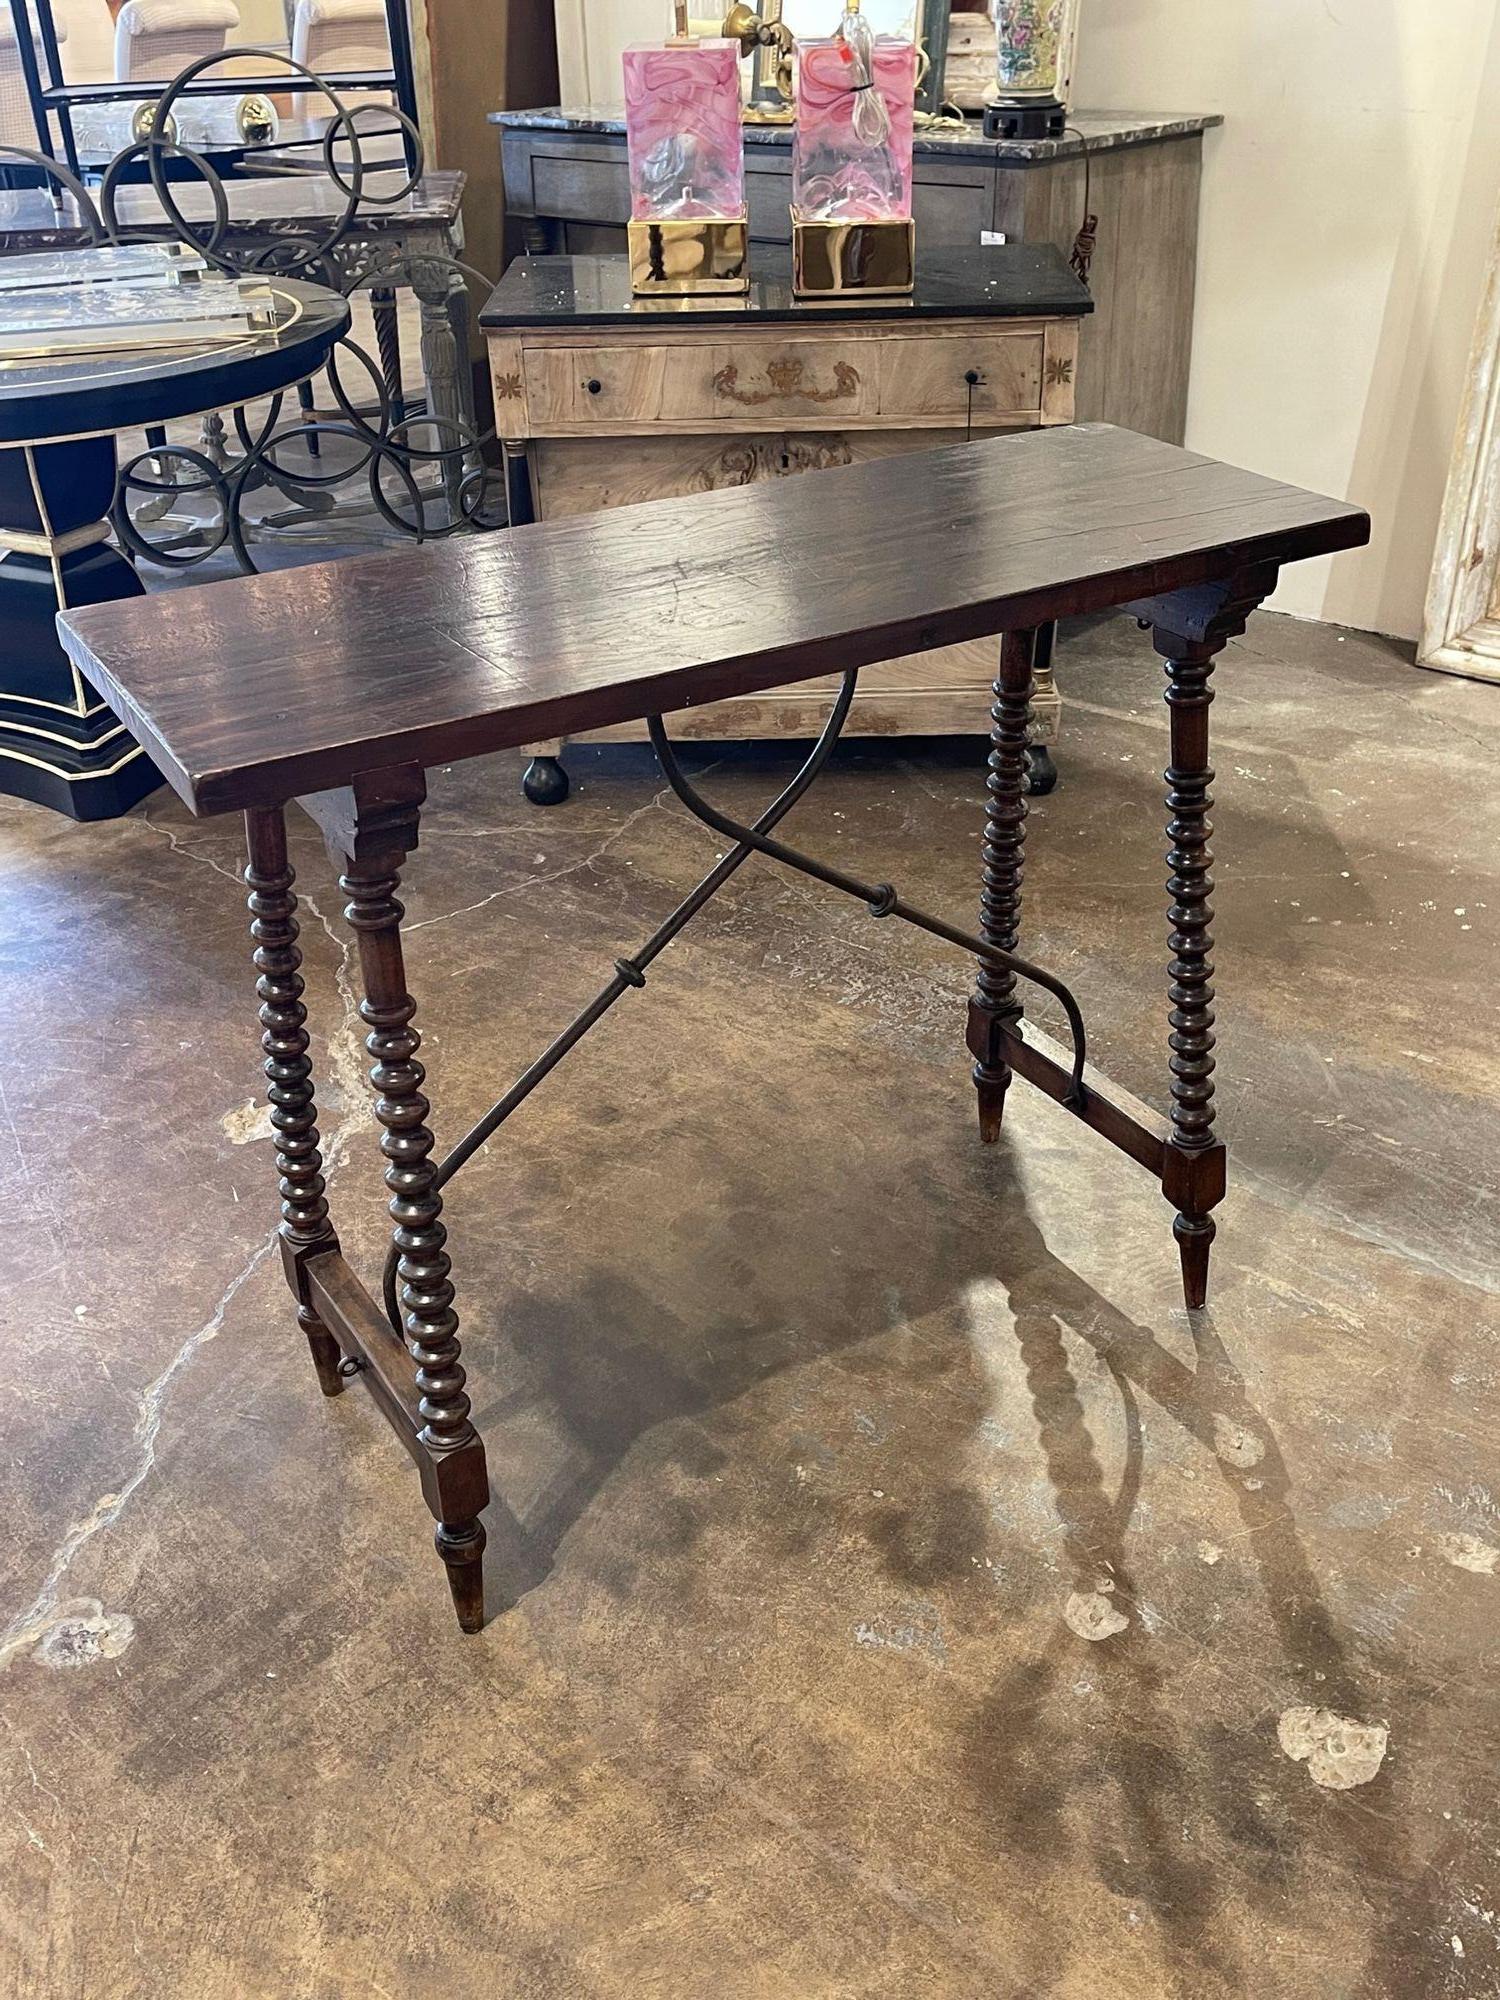 Handsome 18th century Spanish walnut and iron turned leg side table. A lovely accent piece! Wonderful for a study or library.